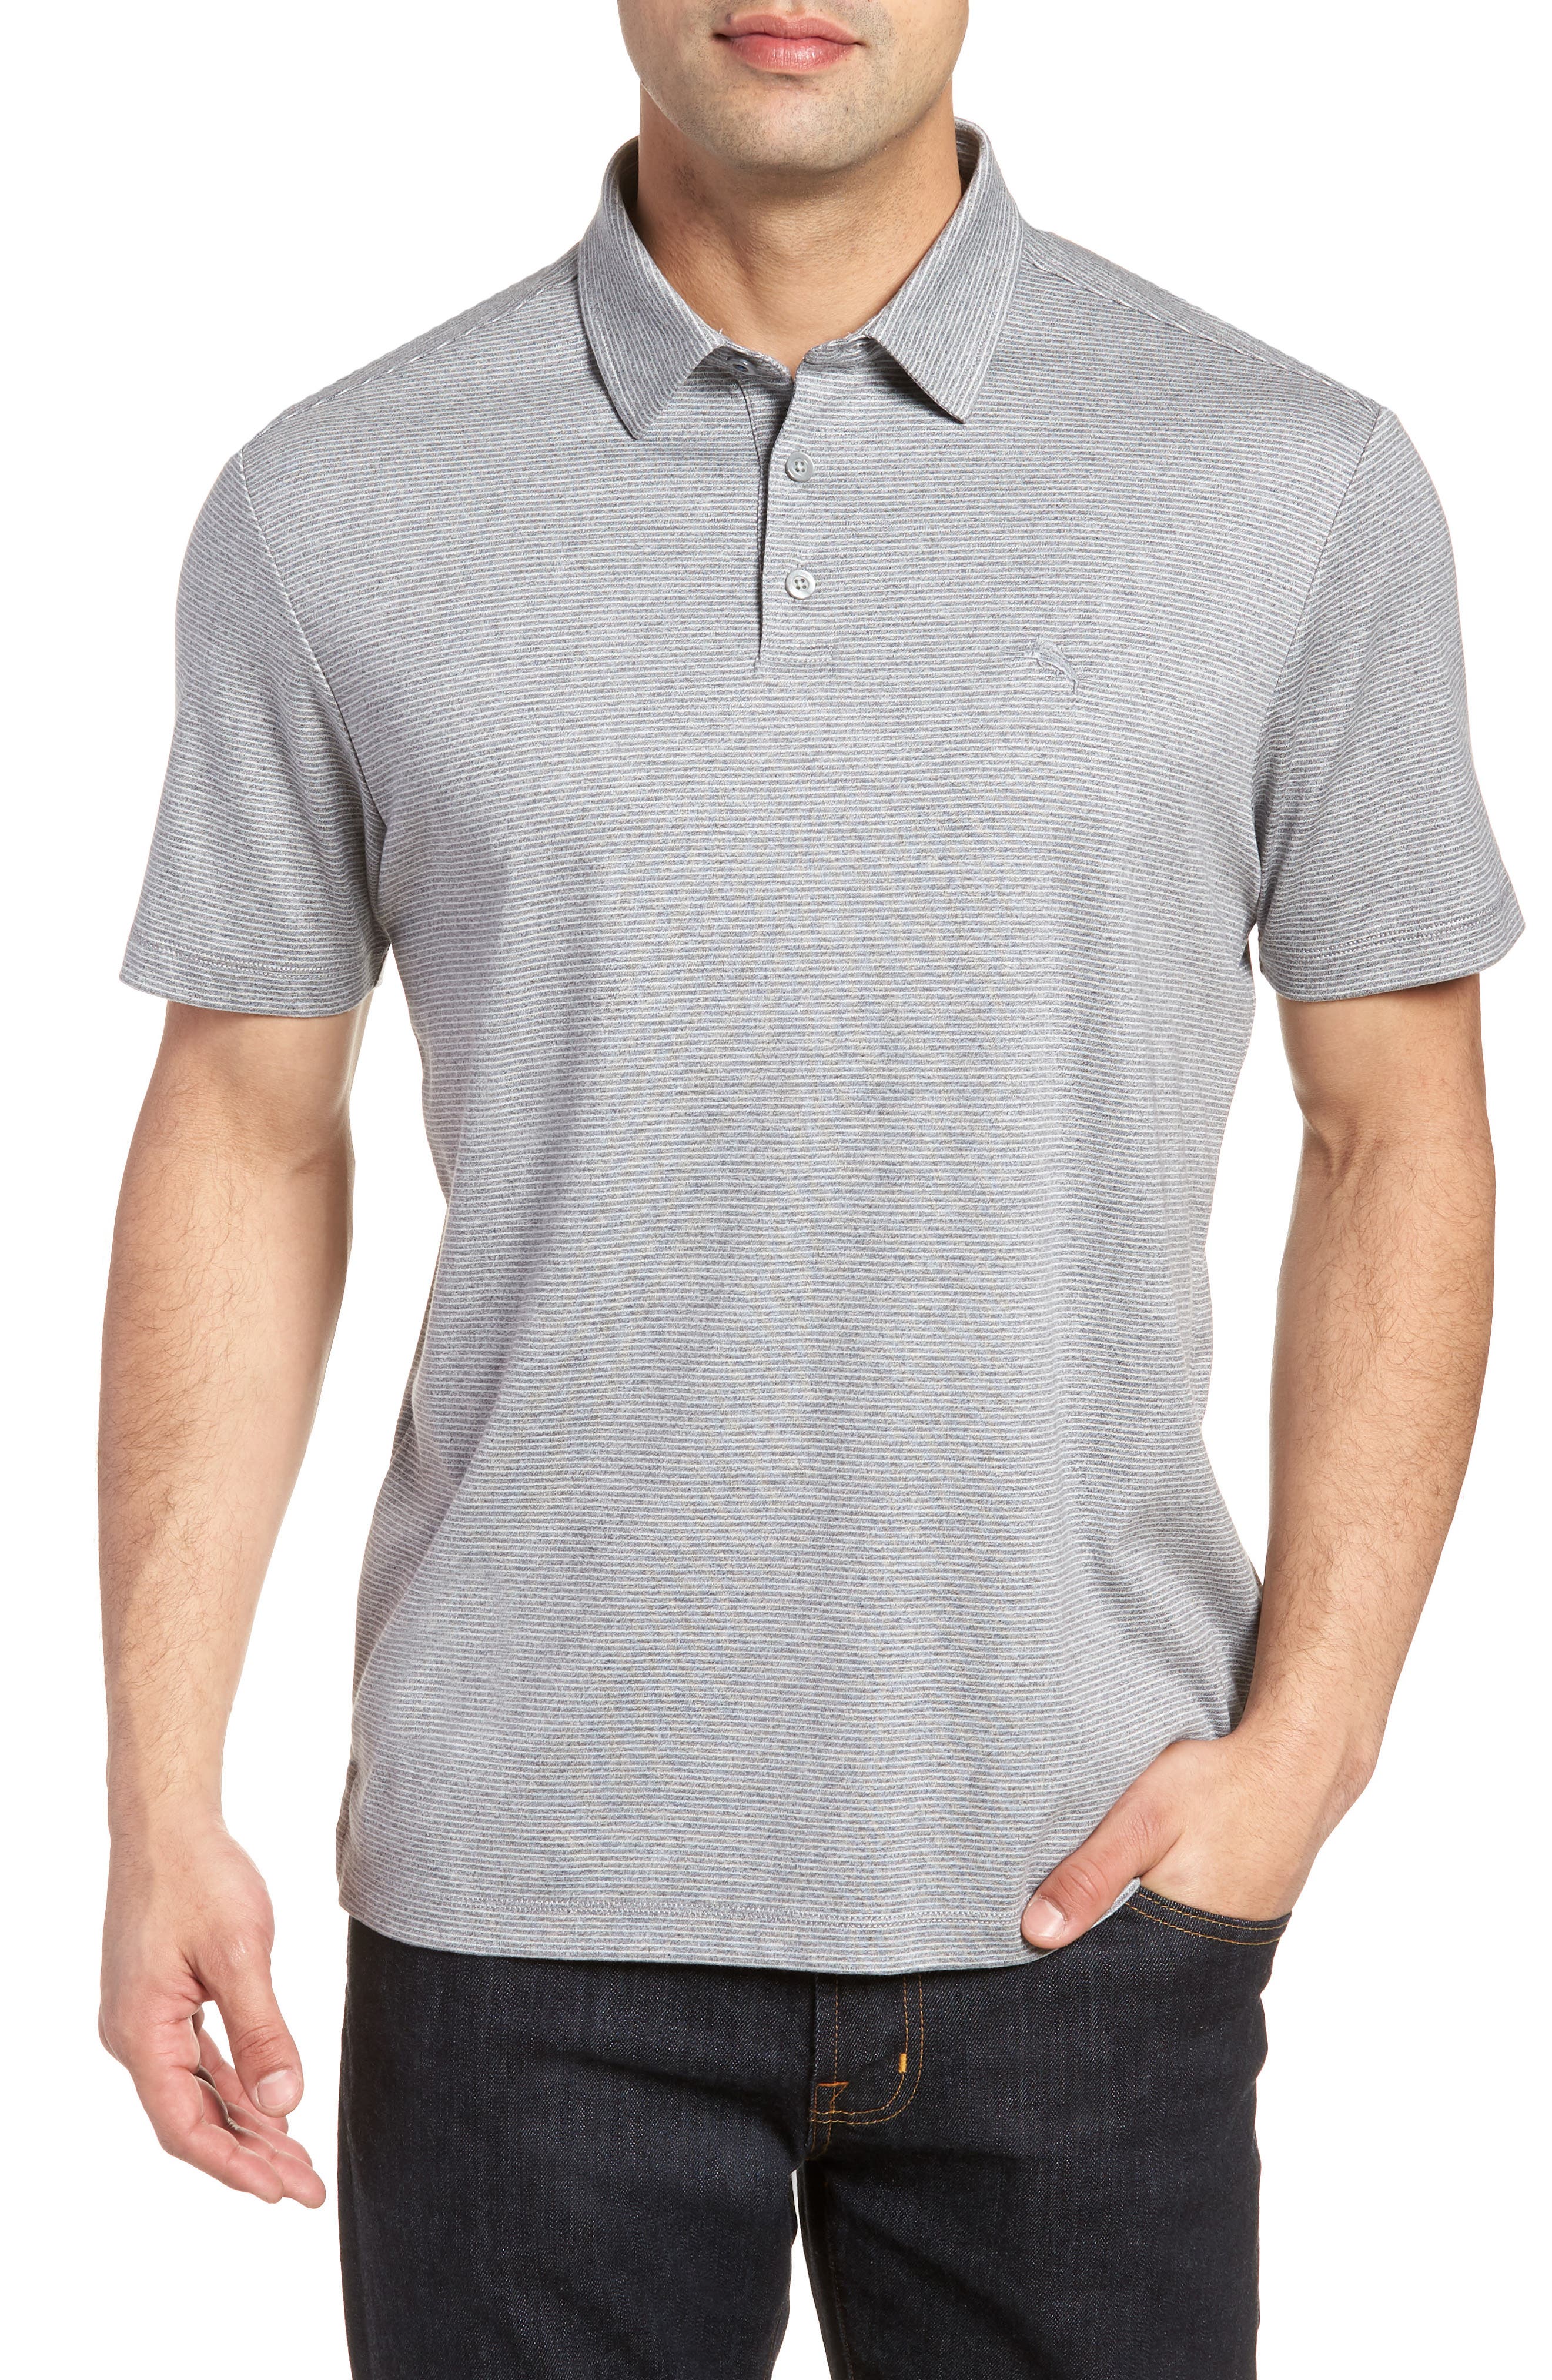 UPC 719260235069 product image for Men's Tommy Bahama Pacific Shore Polo, Size X-Large - Grey | upcitemdb.com